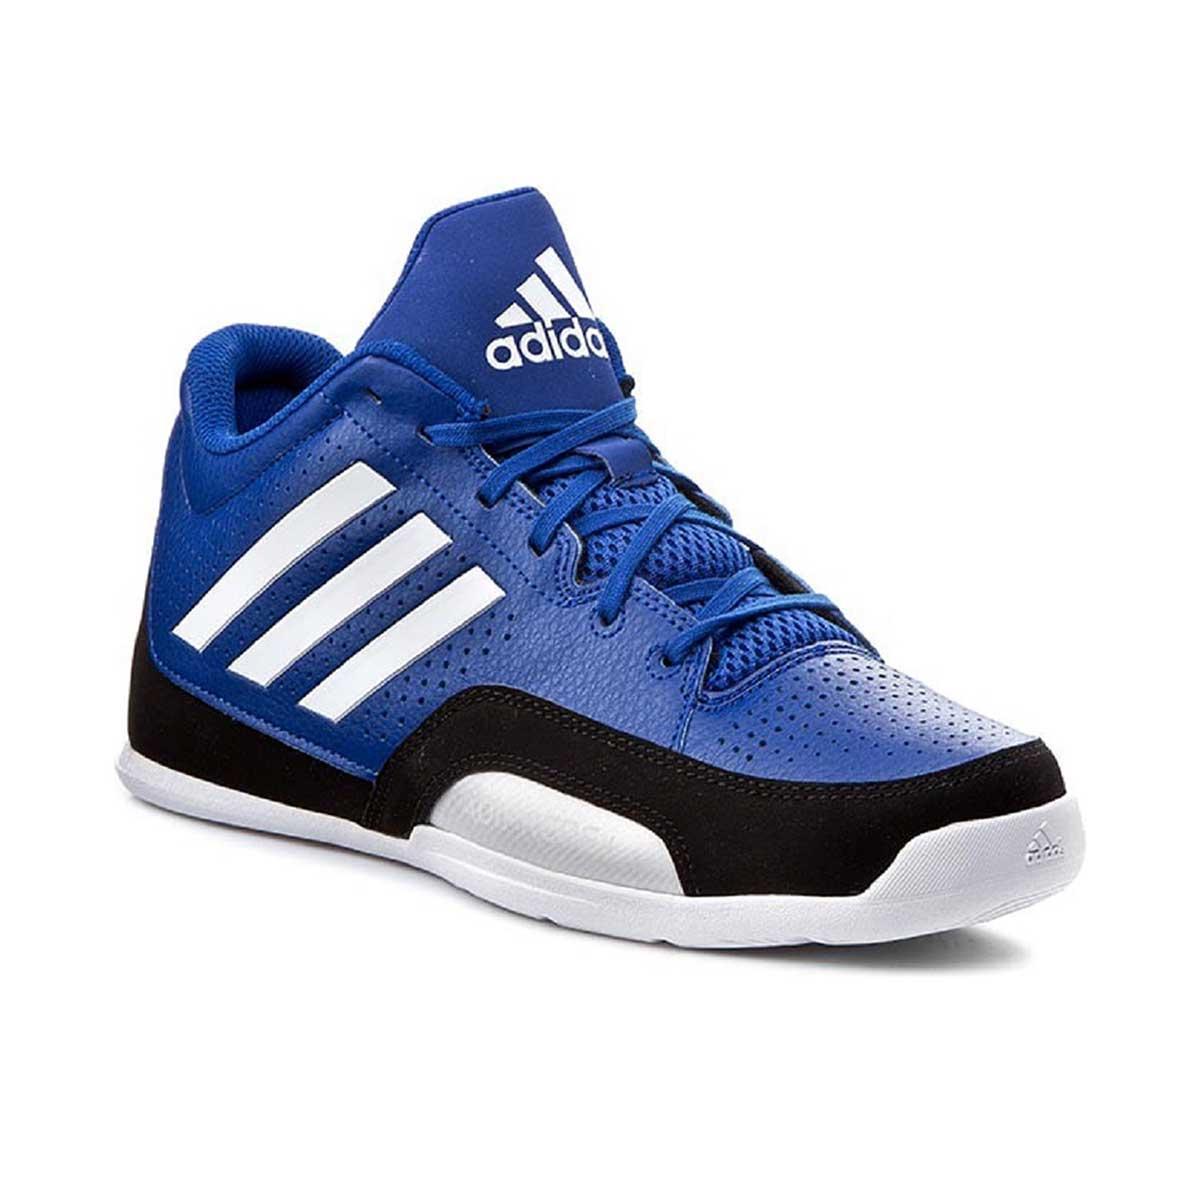 Buy Adidas 3 Series 2015 Basketball Shoes Online in India